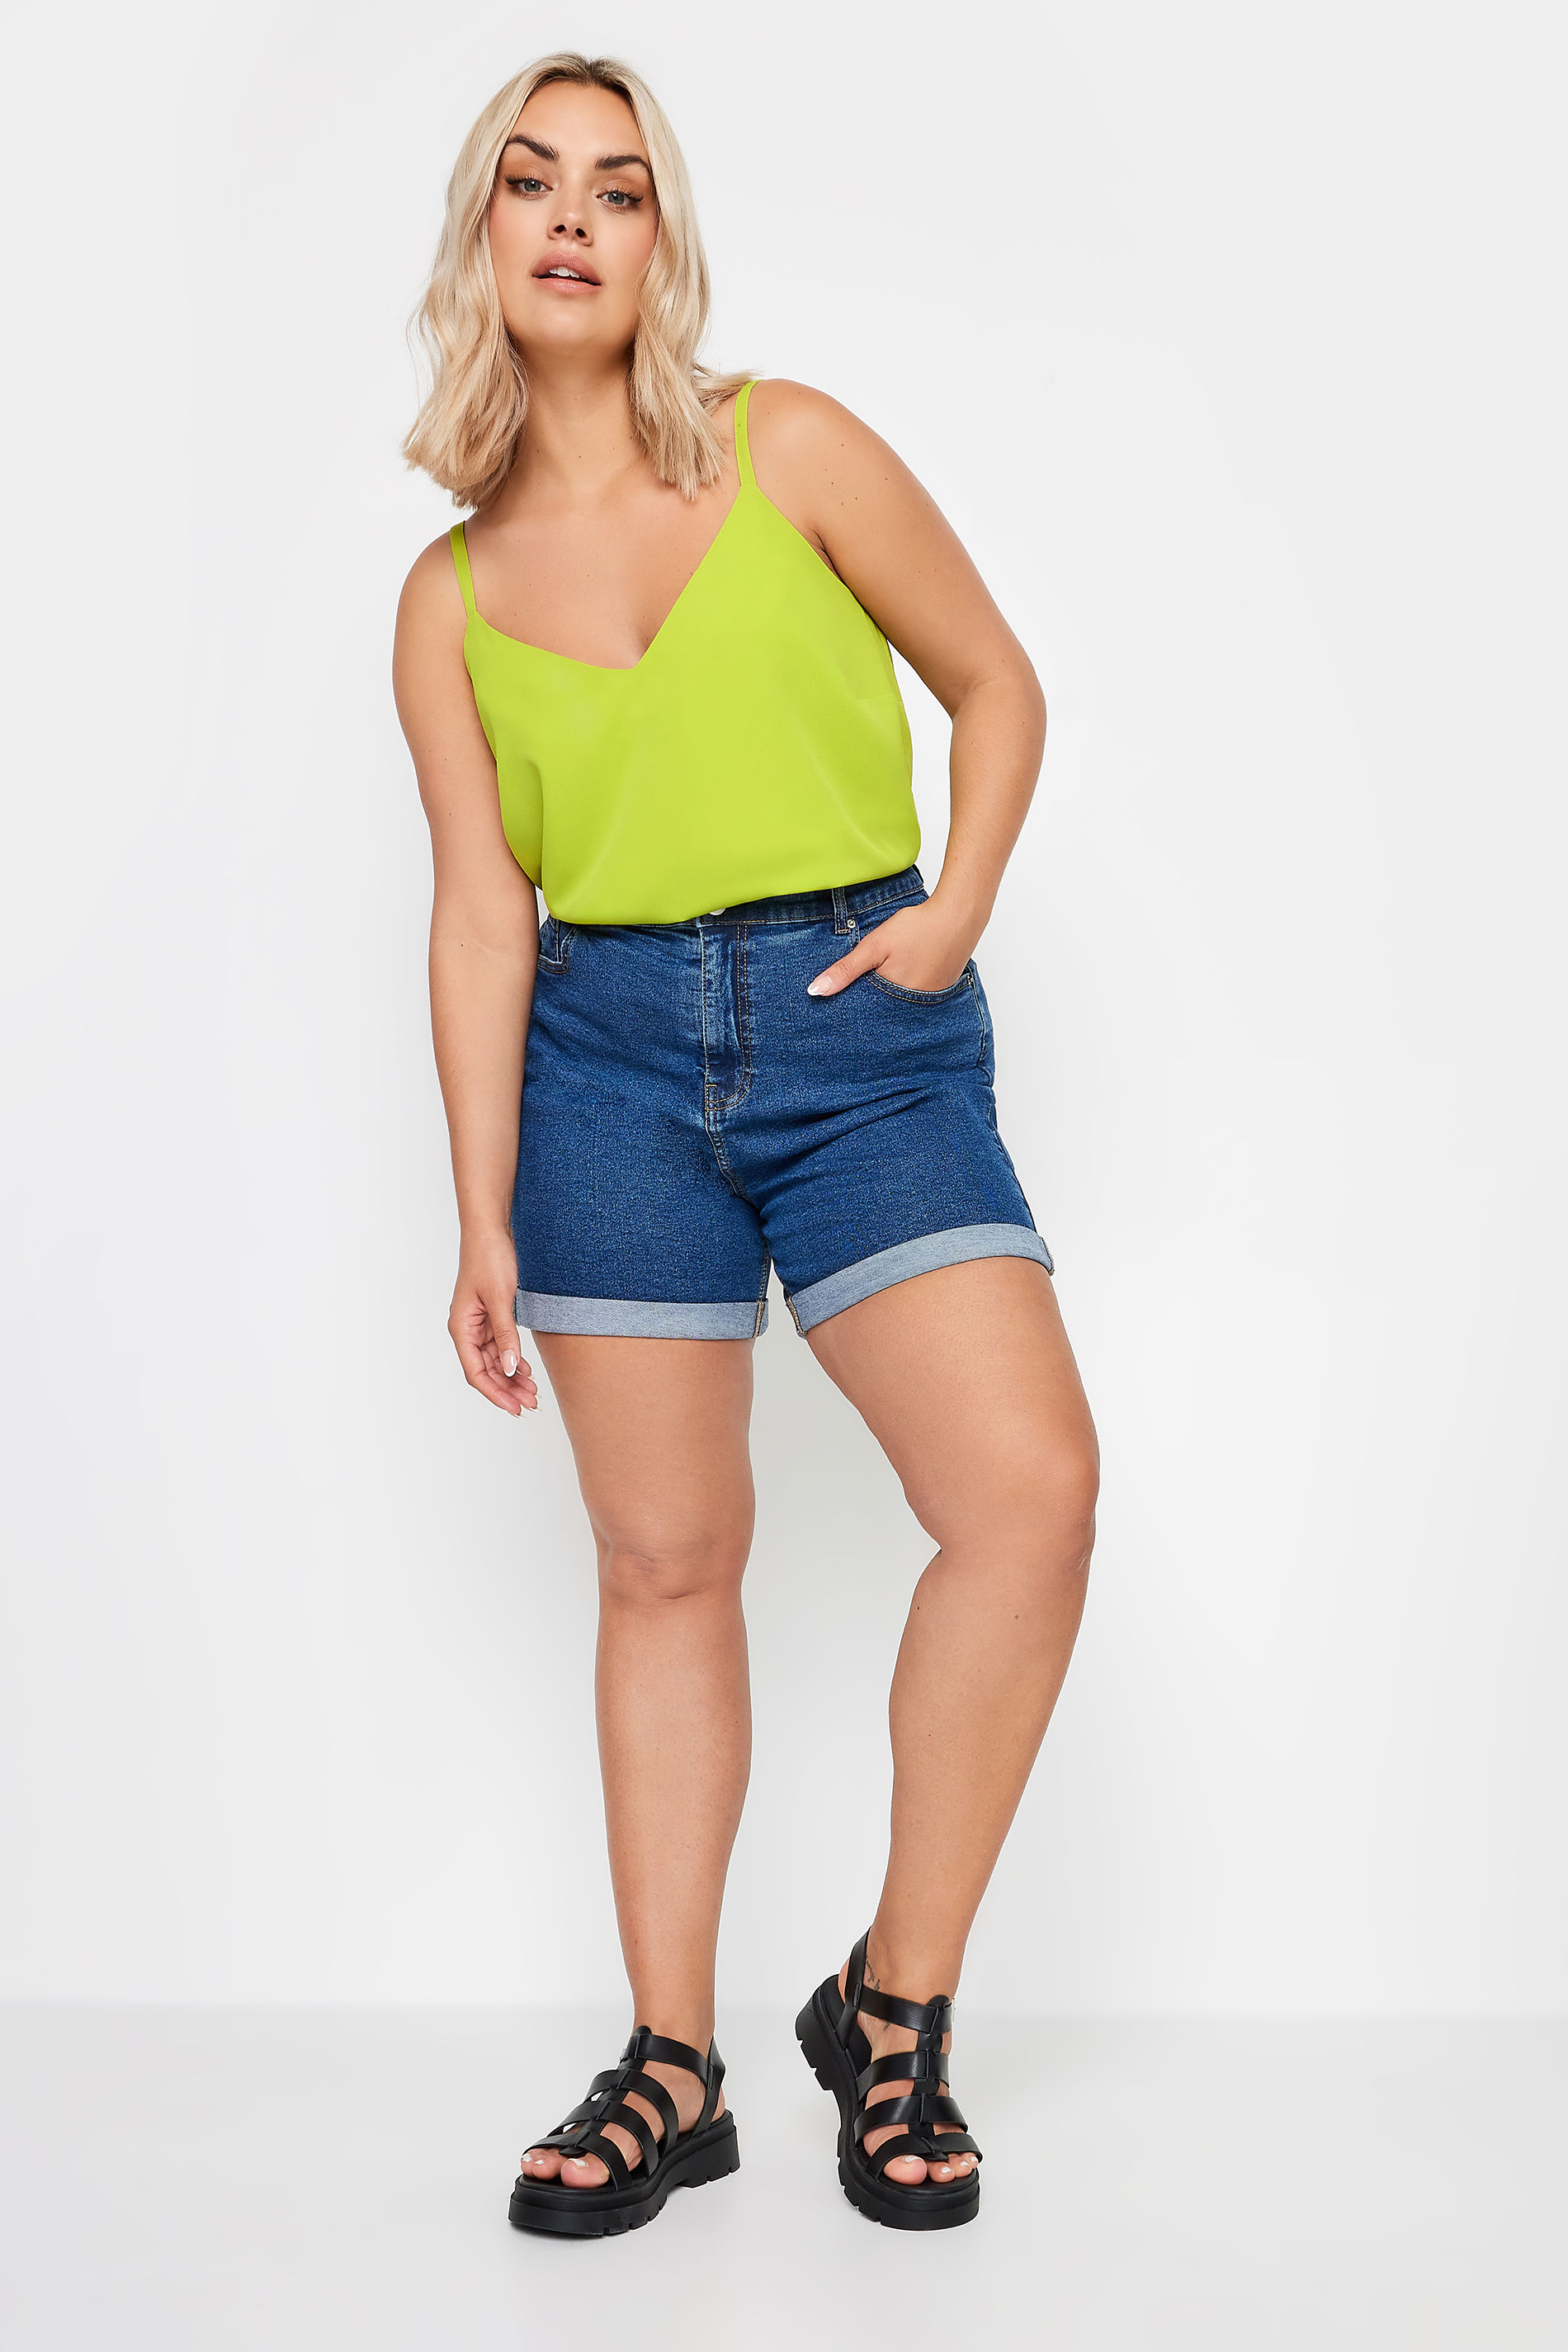 YOURS Plus Size Green Cami Vest Top | Yours Clothing 2